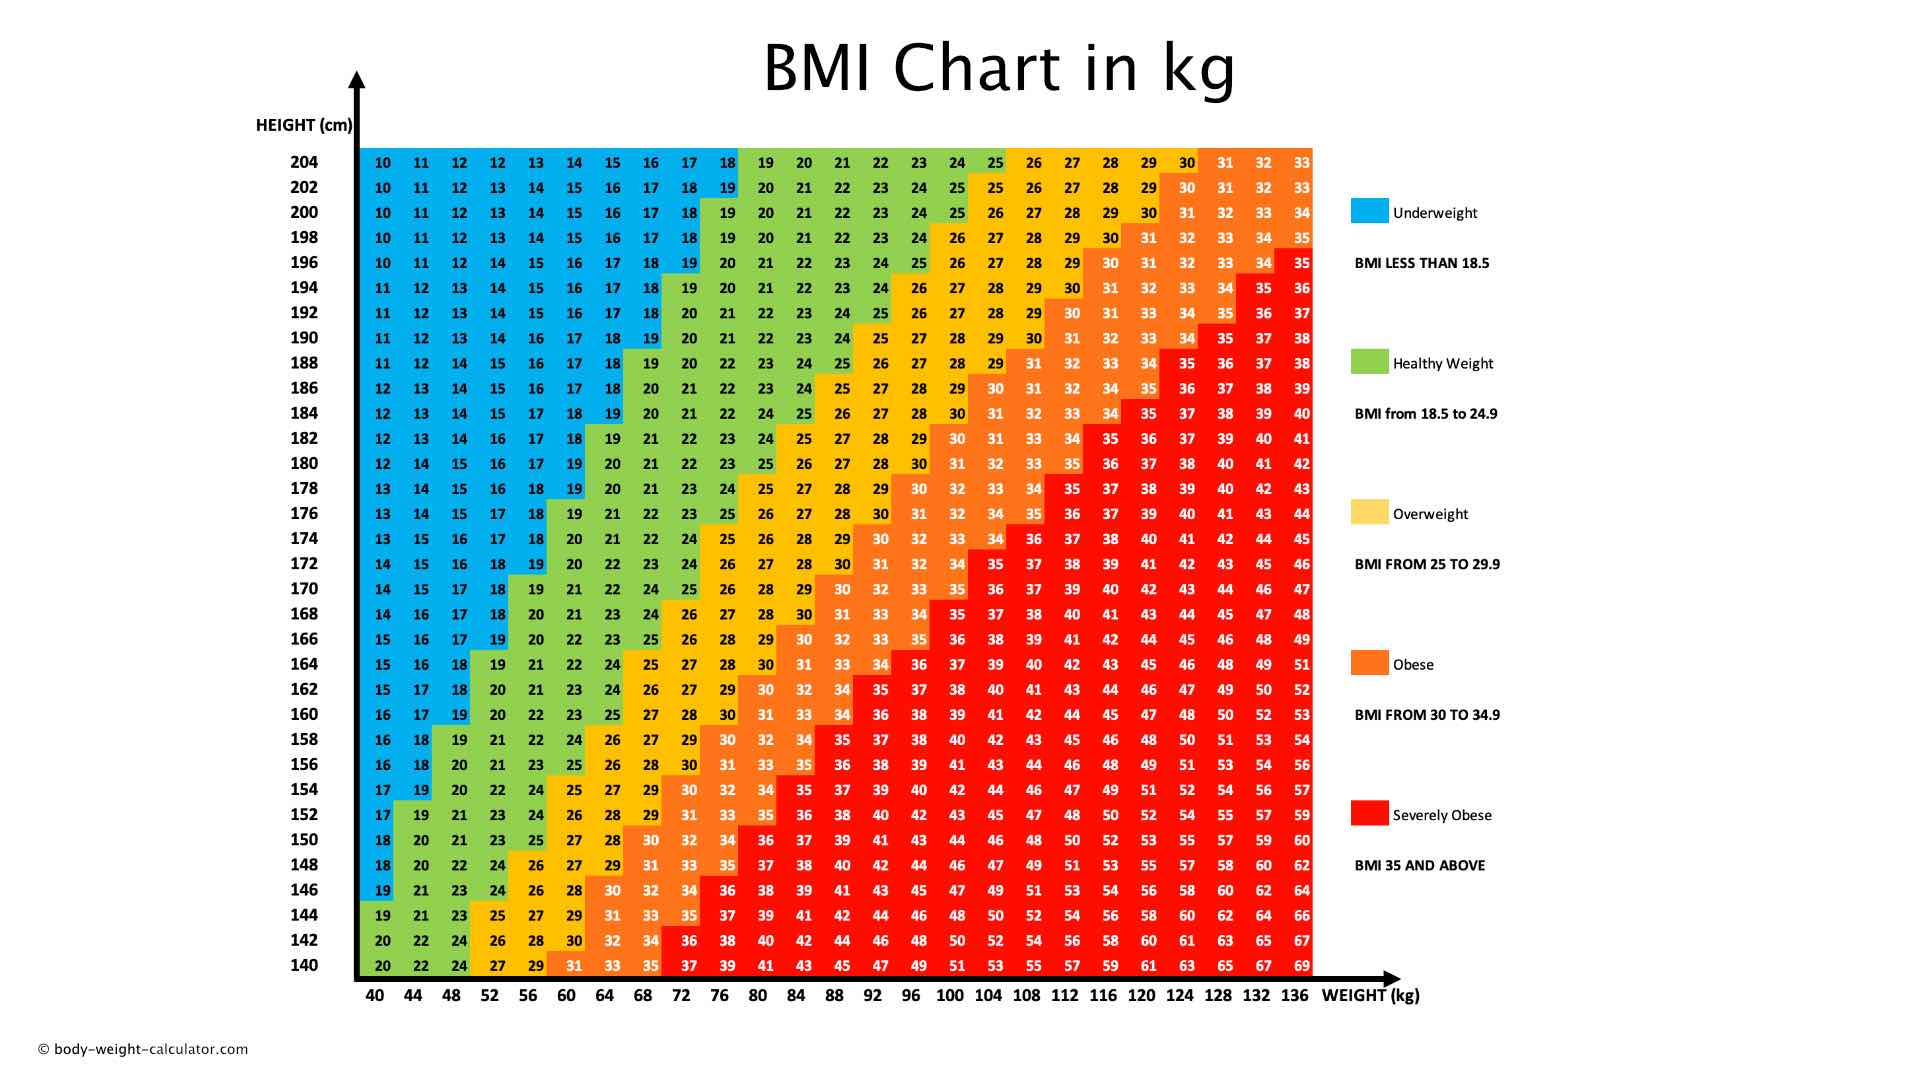 BMI chart by age in New Zealand